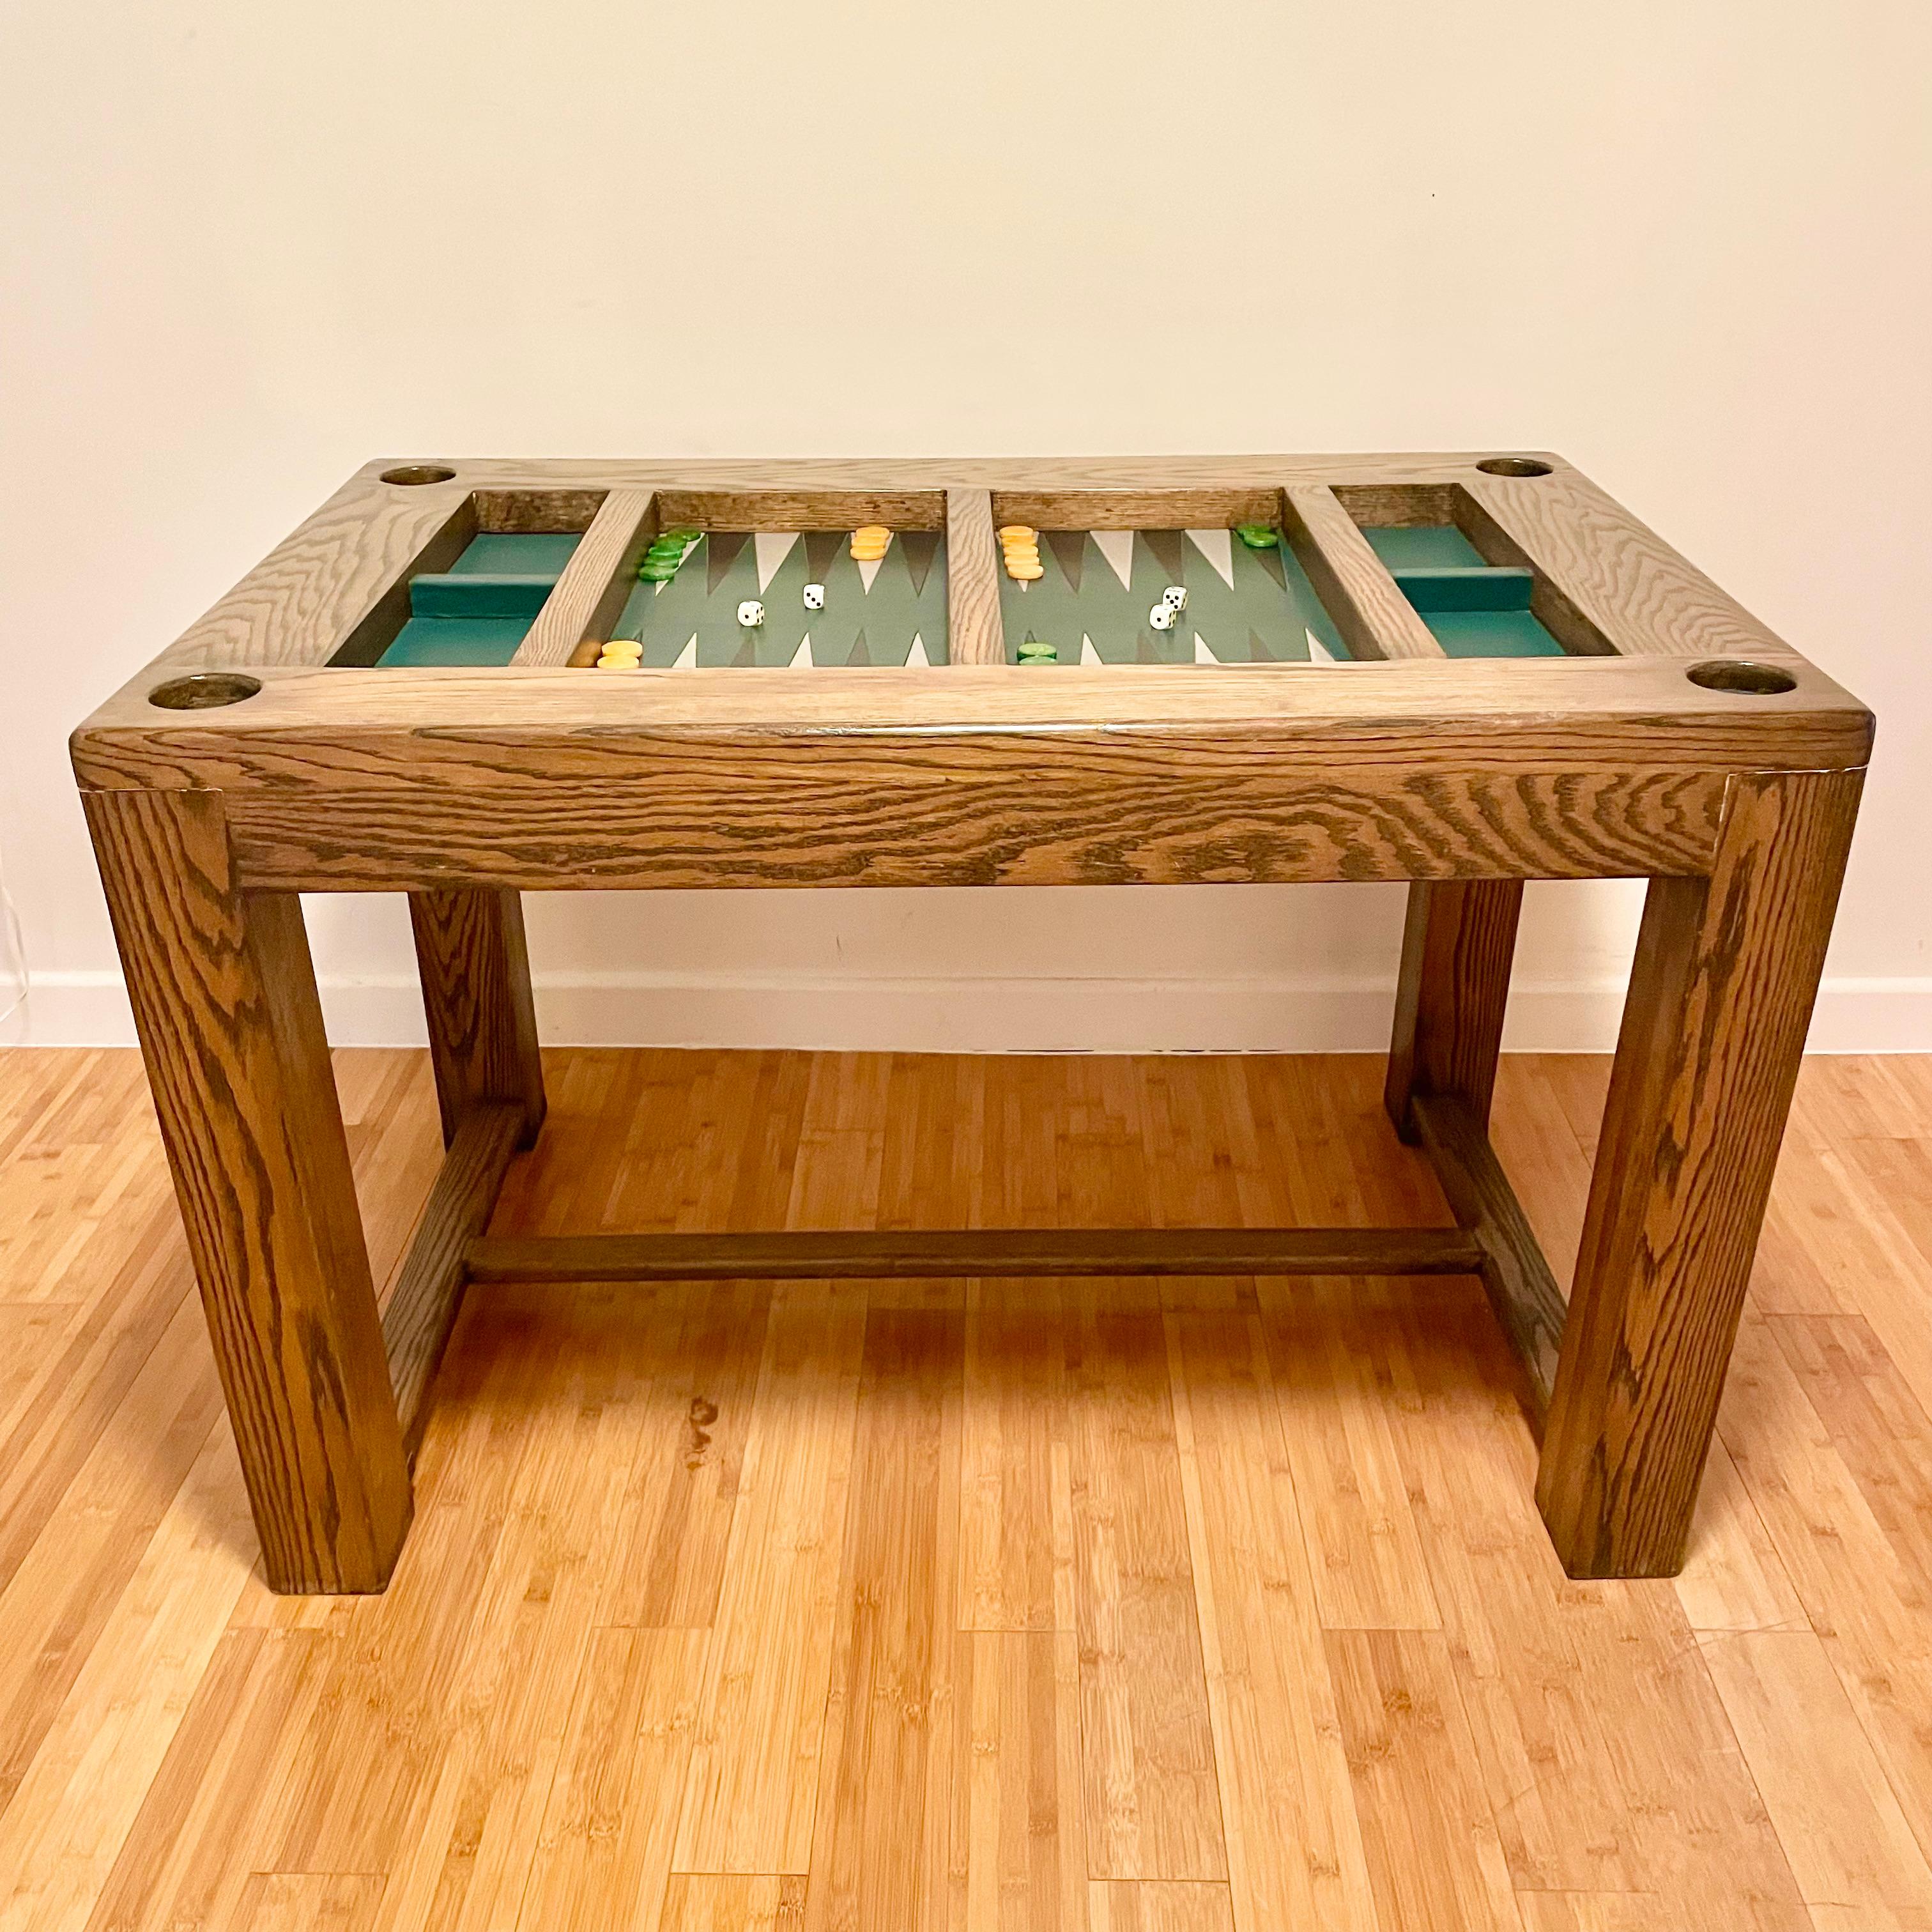 Classic oak and leather backgammon table. Playing surface is a rich green leather with alternating black and white leather triangles. Amazing color scheme and presence. Also comes with leather wrapped cups for dice. Oak has great lines and grain.